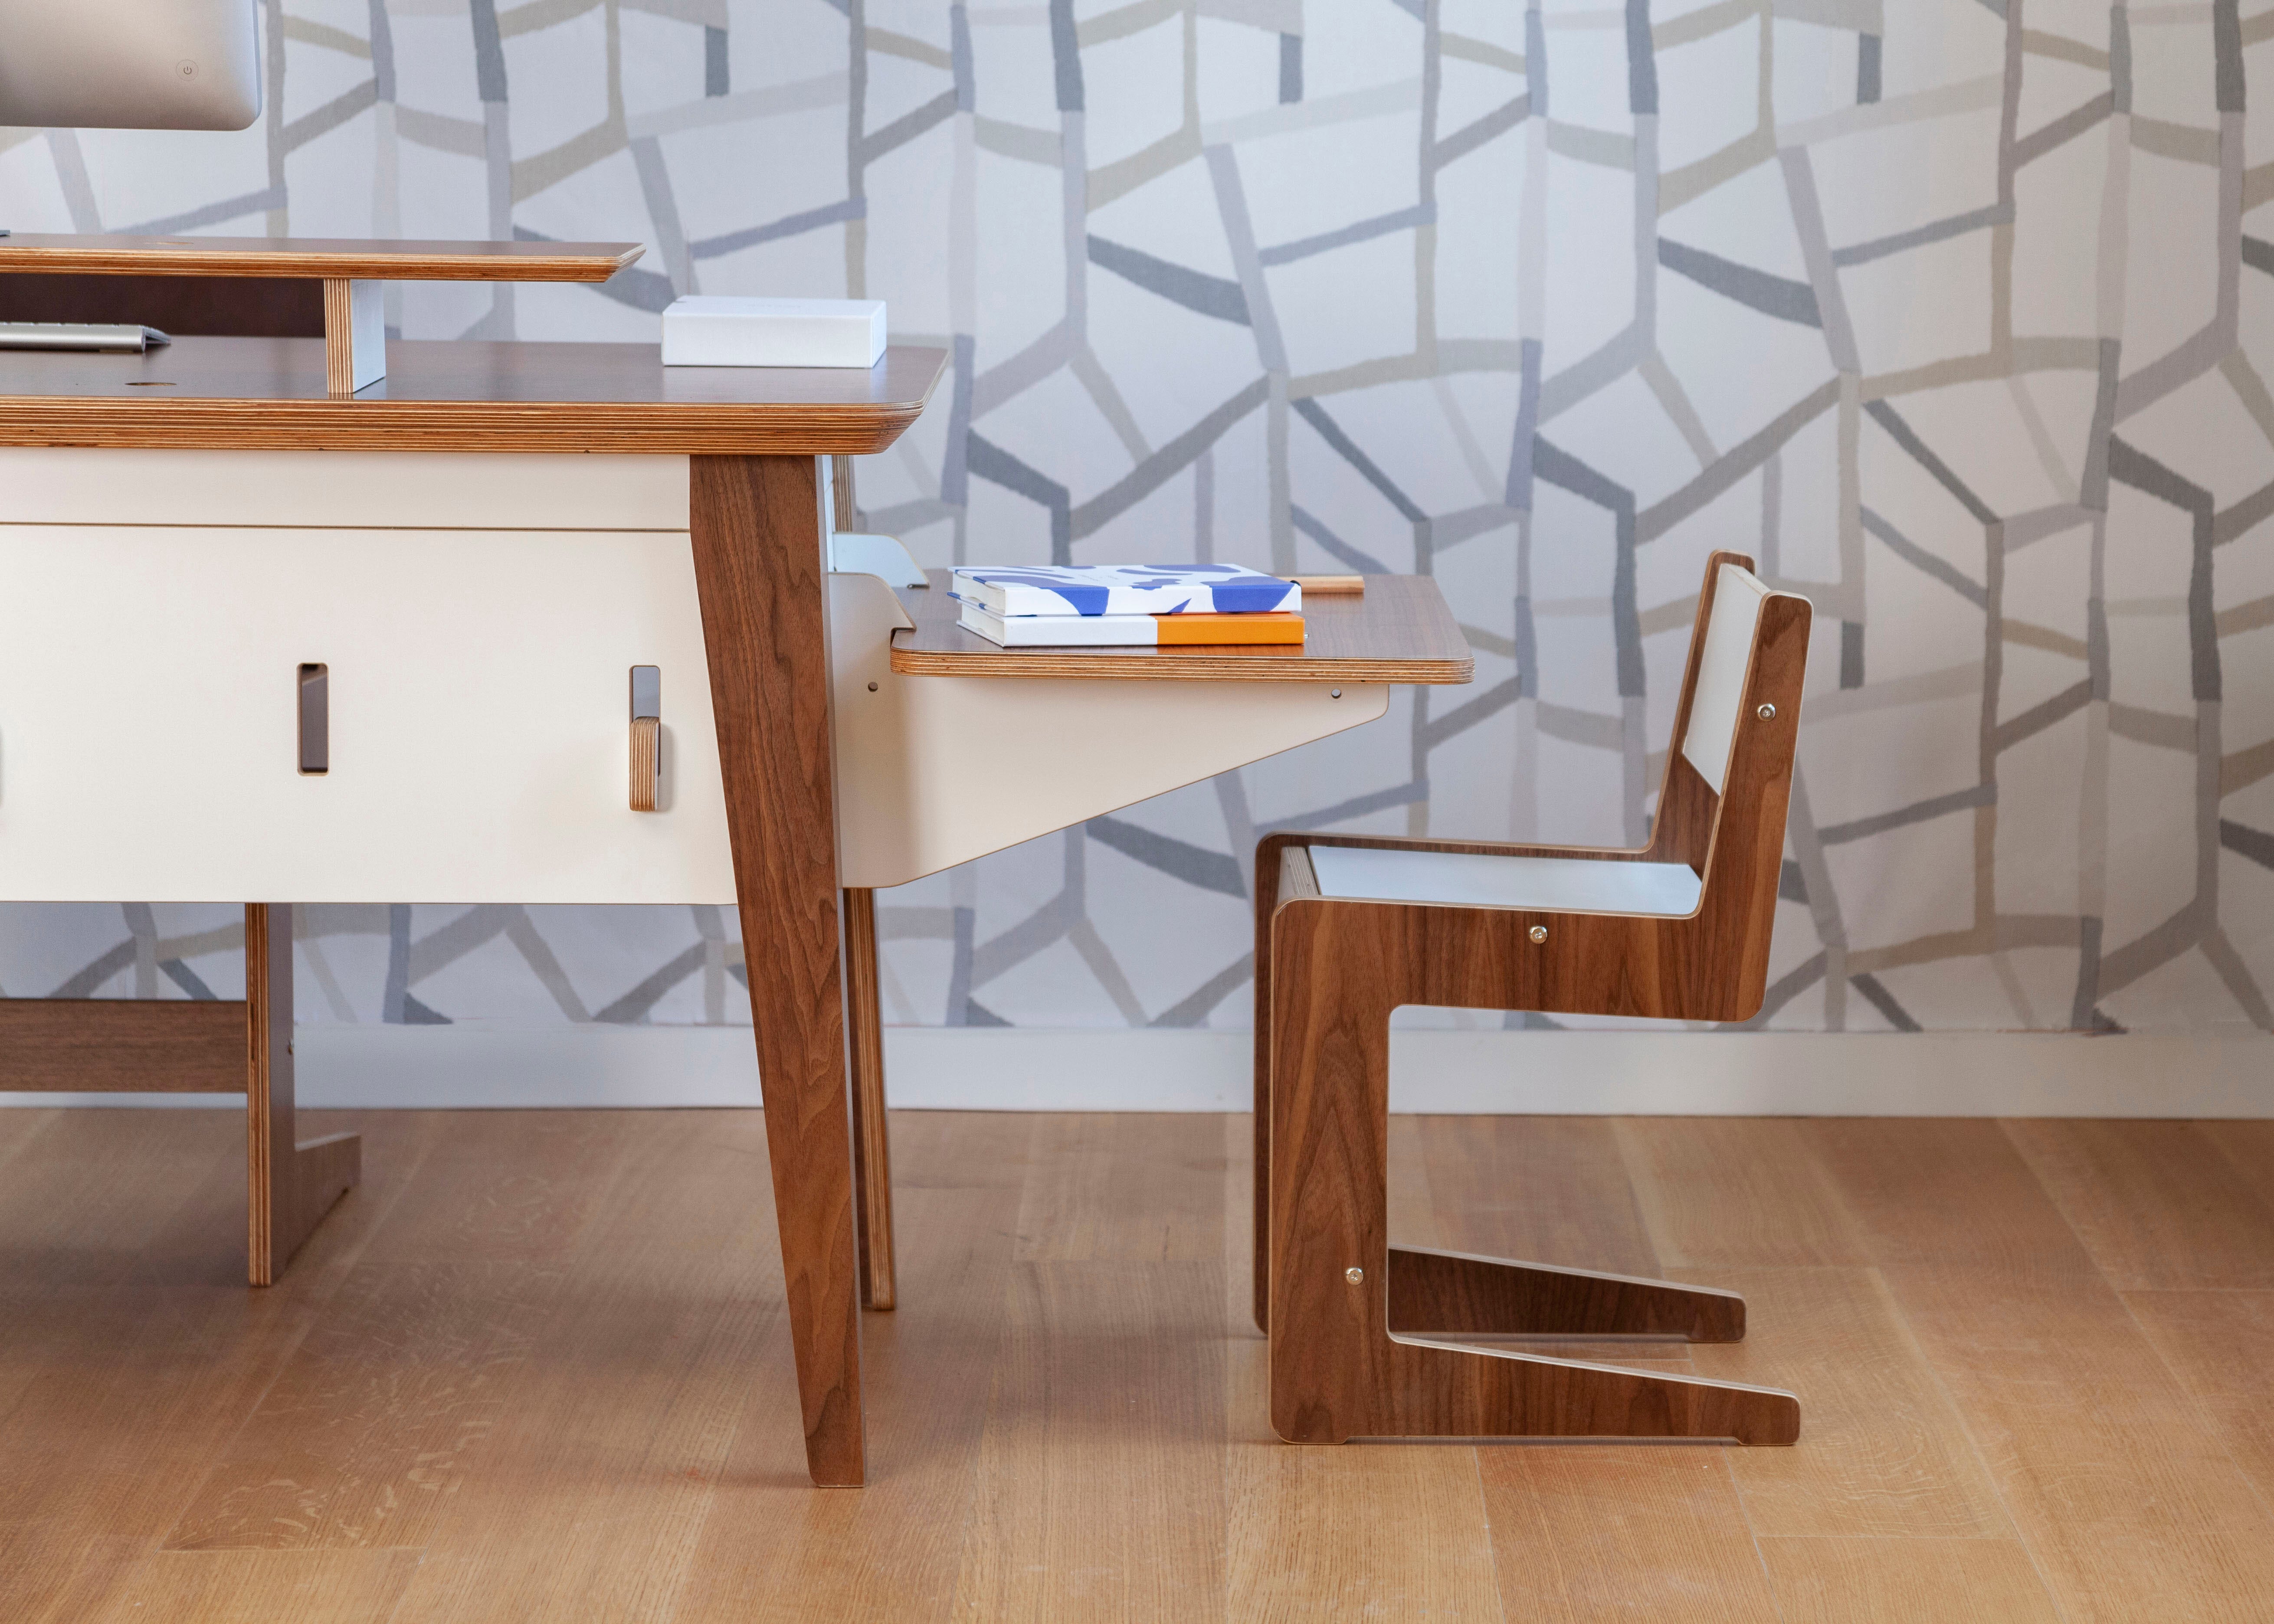 Modern wooden desk and chair on a hardwood floor against a geometric patterned wallpaper backdrop.